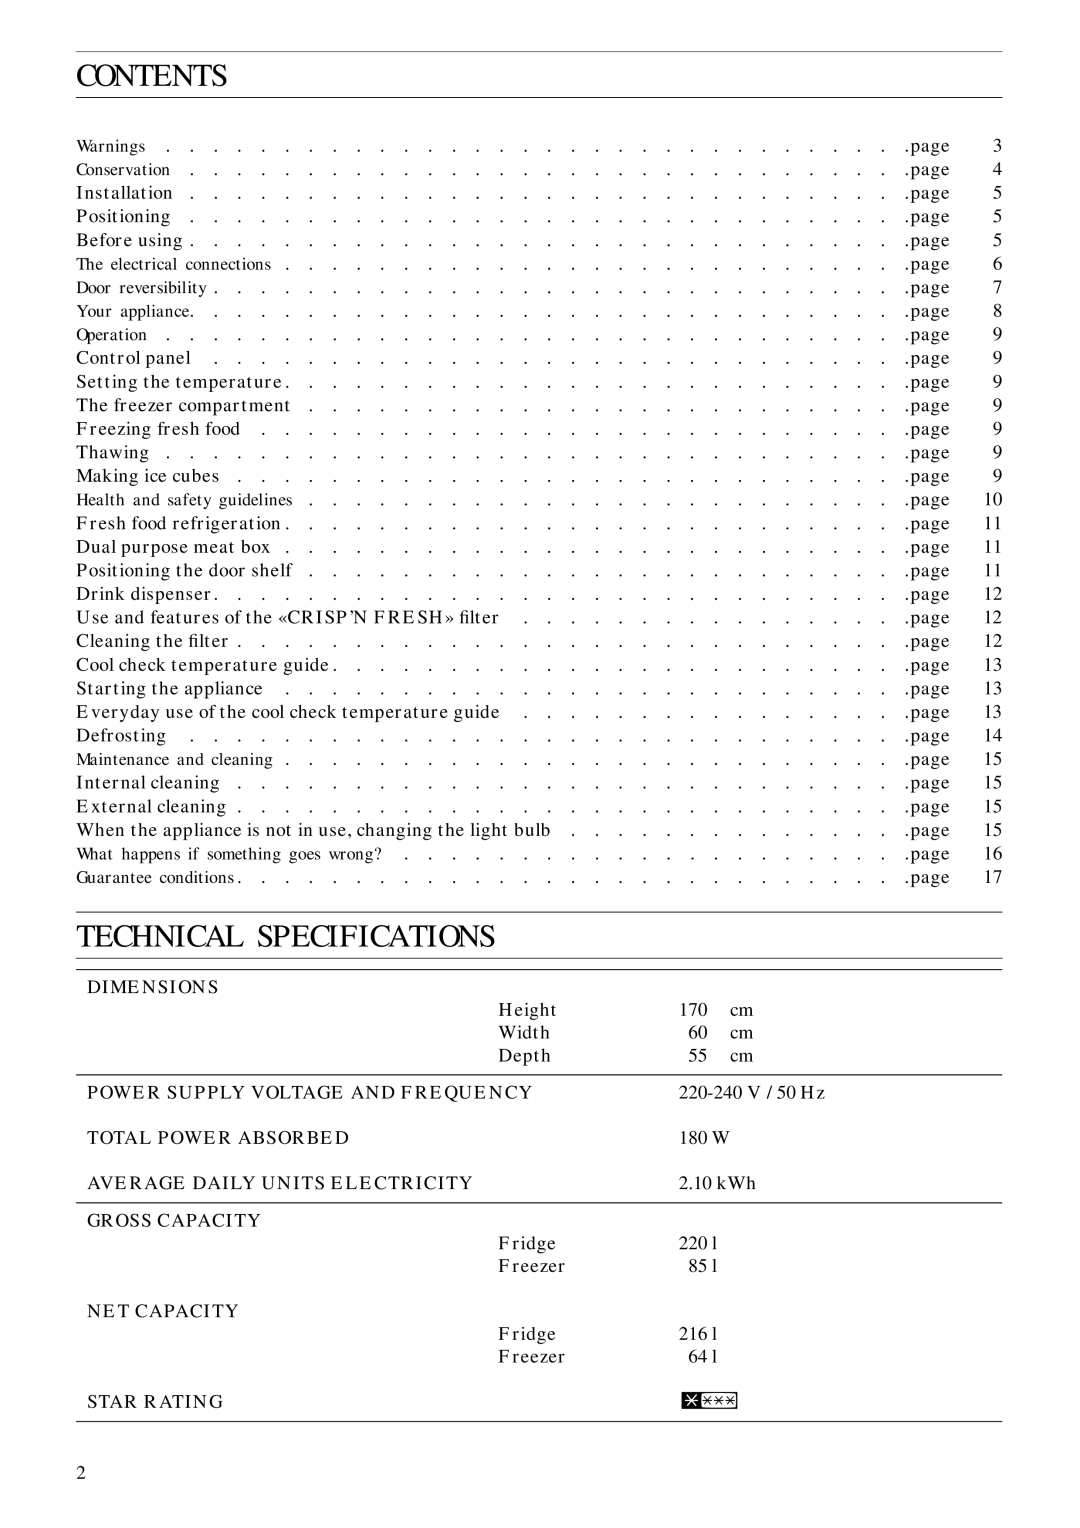 Zanussi ZFC 80/30 FF manual Contents, Technical Specifications 